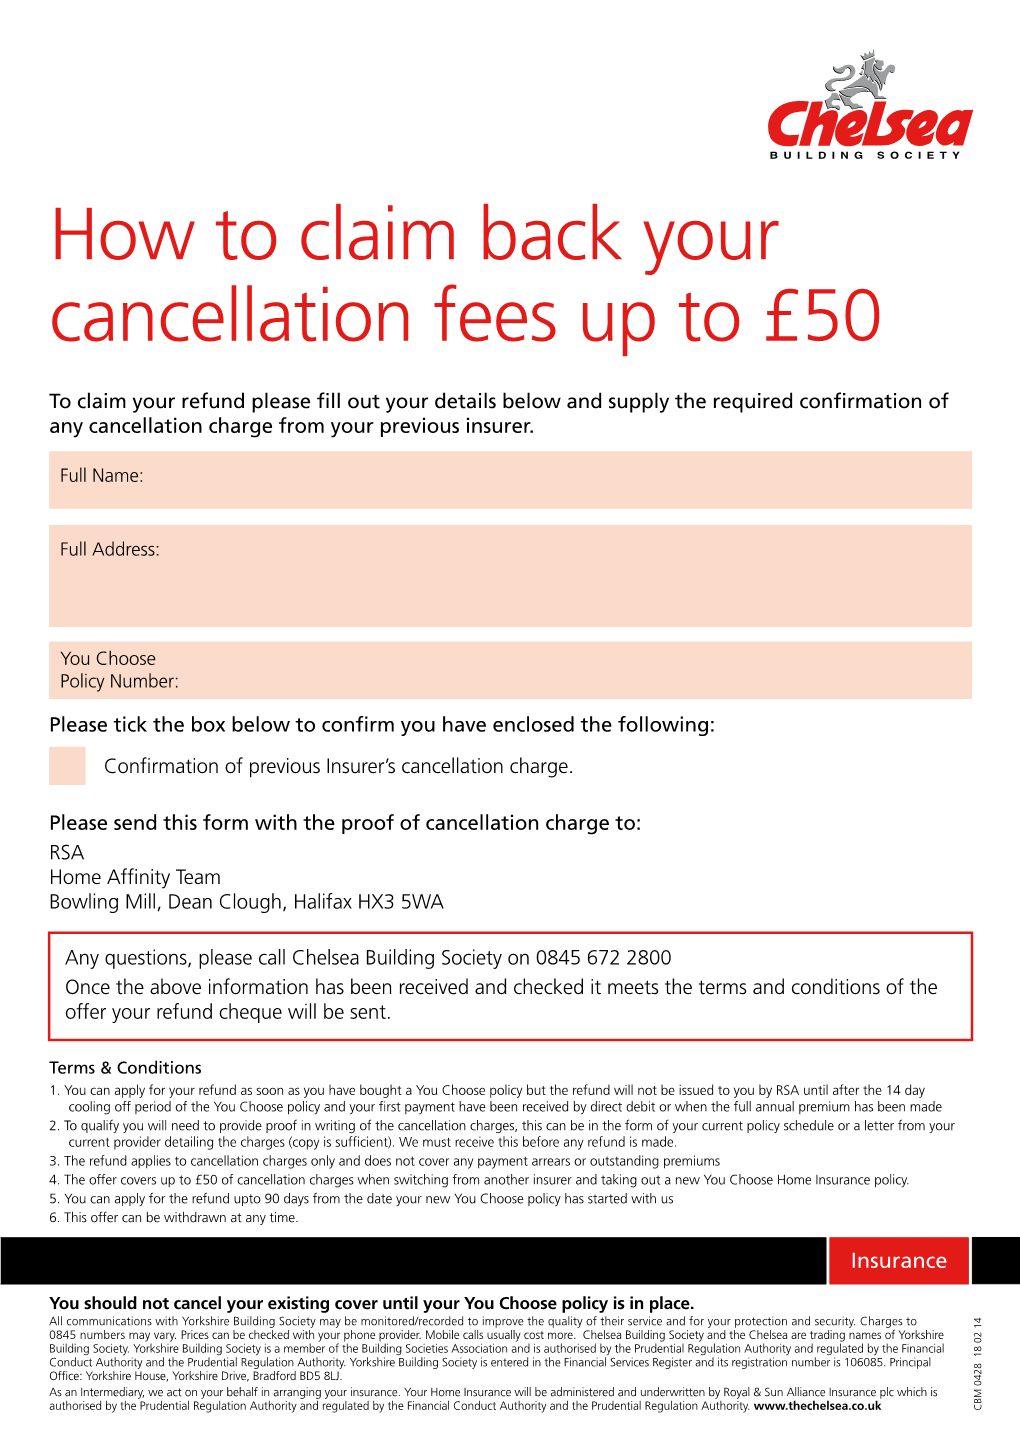 How to Claim Back Your Cancellation Fees up to £50